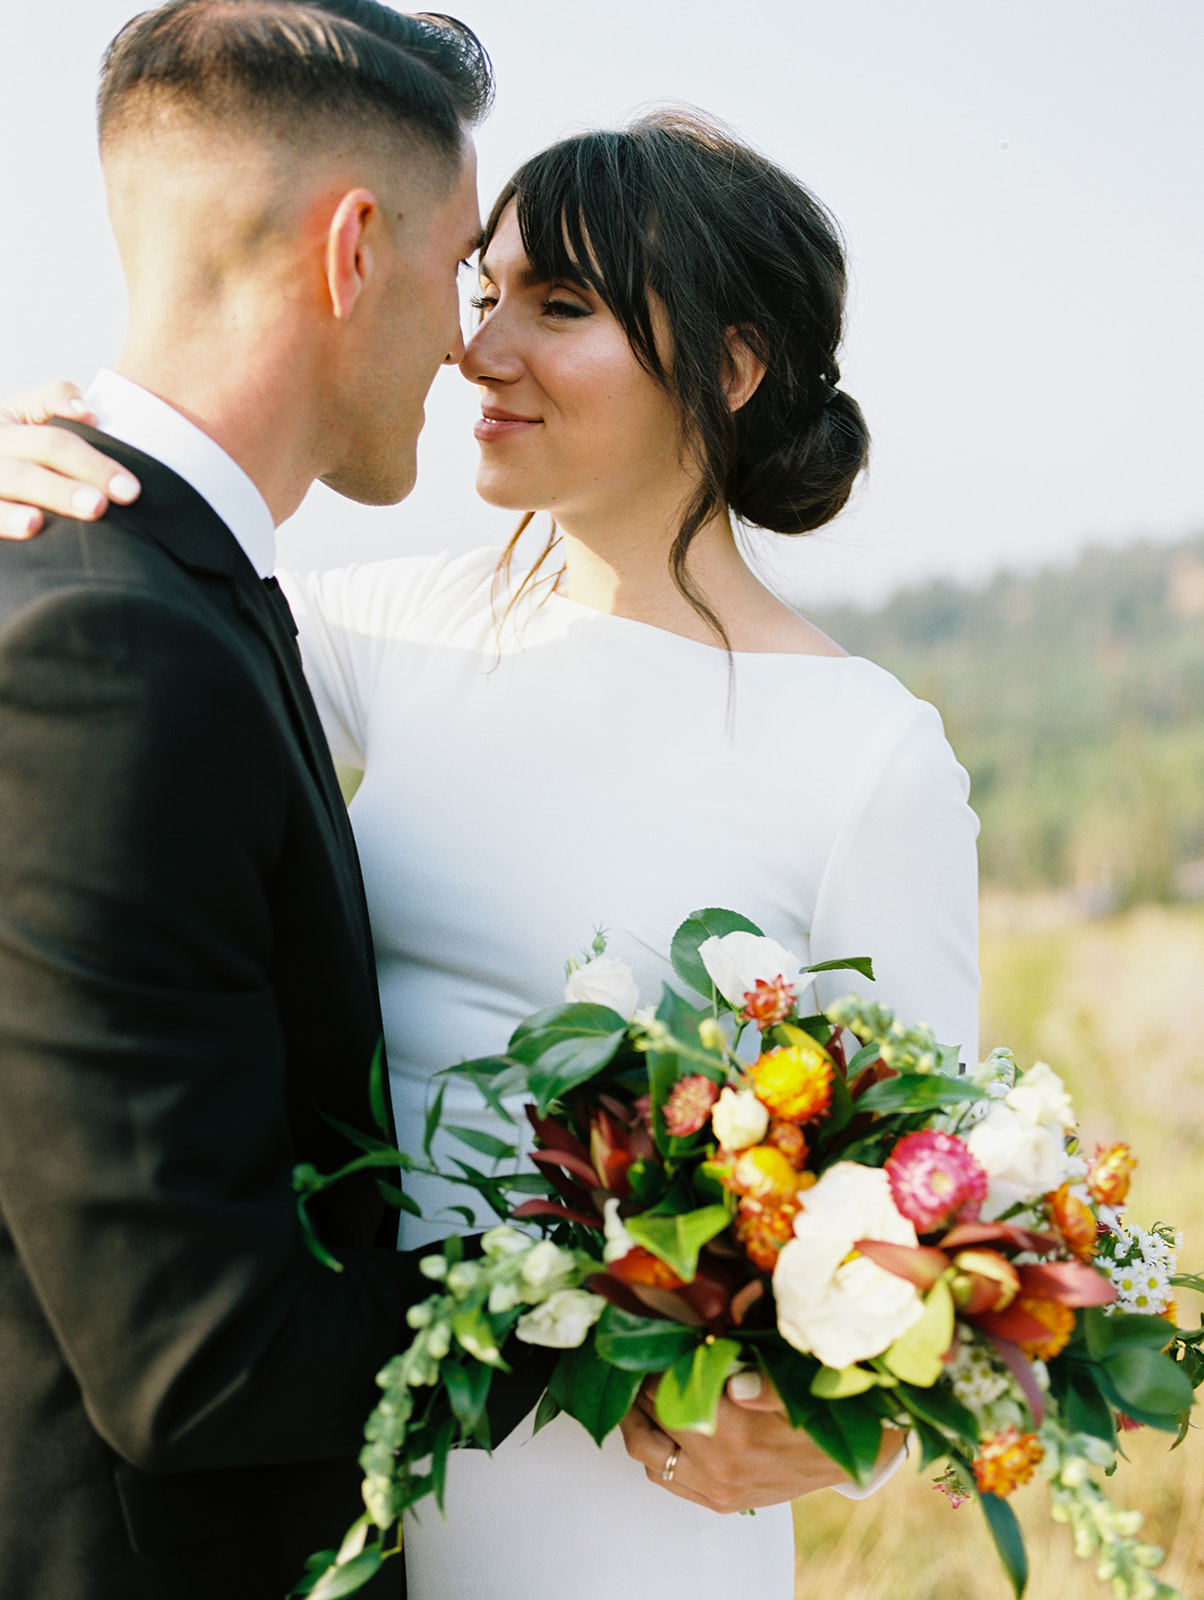 Couple portraits with the bride holding her colorful floral bouquet. She has black hair done in an updo. Wearing a white long sleeve fitted wedding gown.